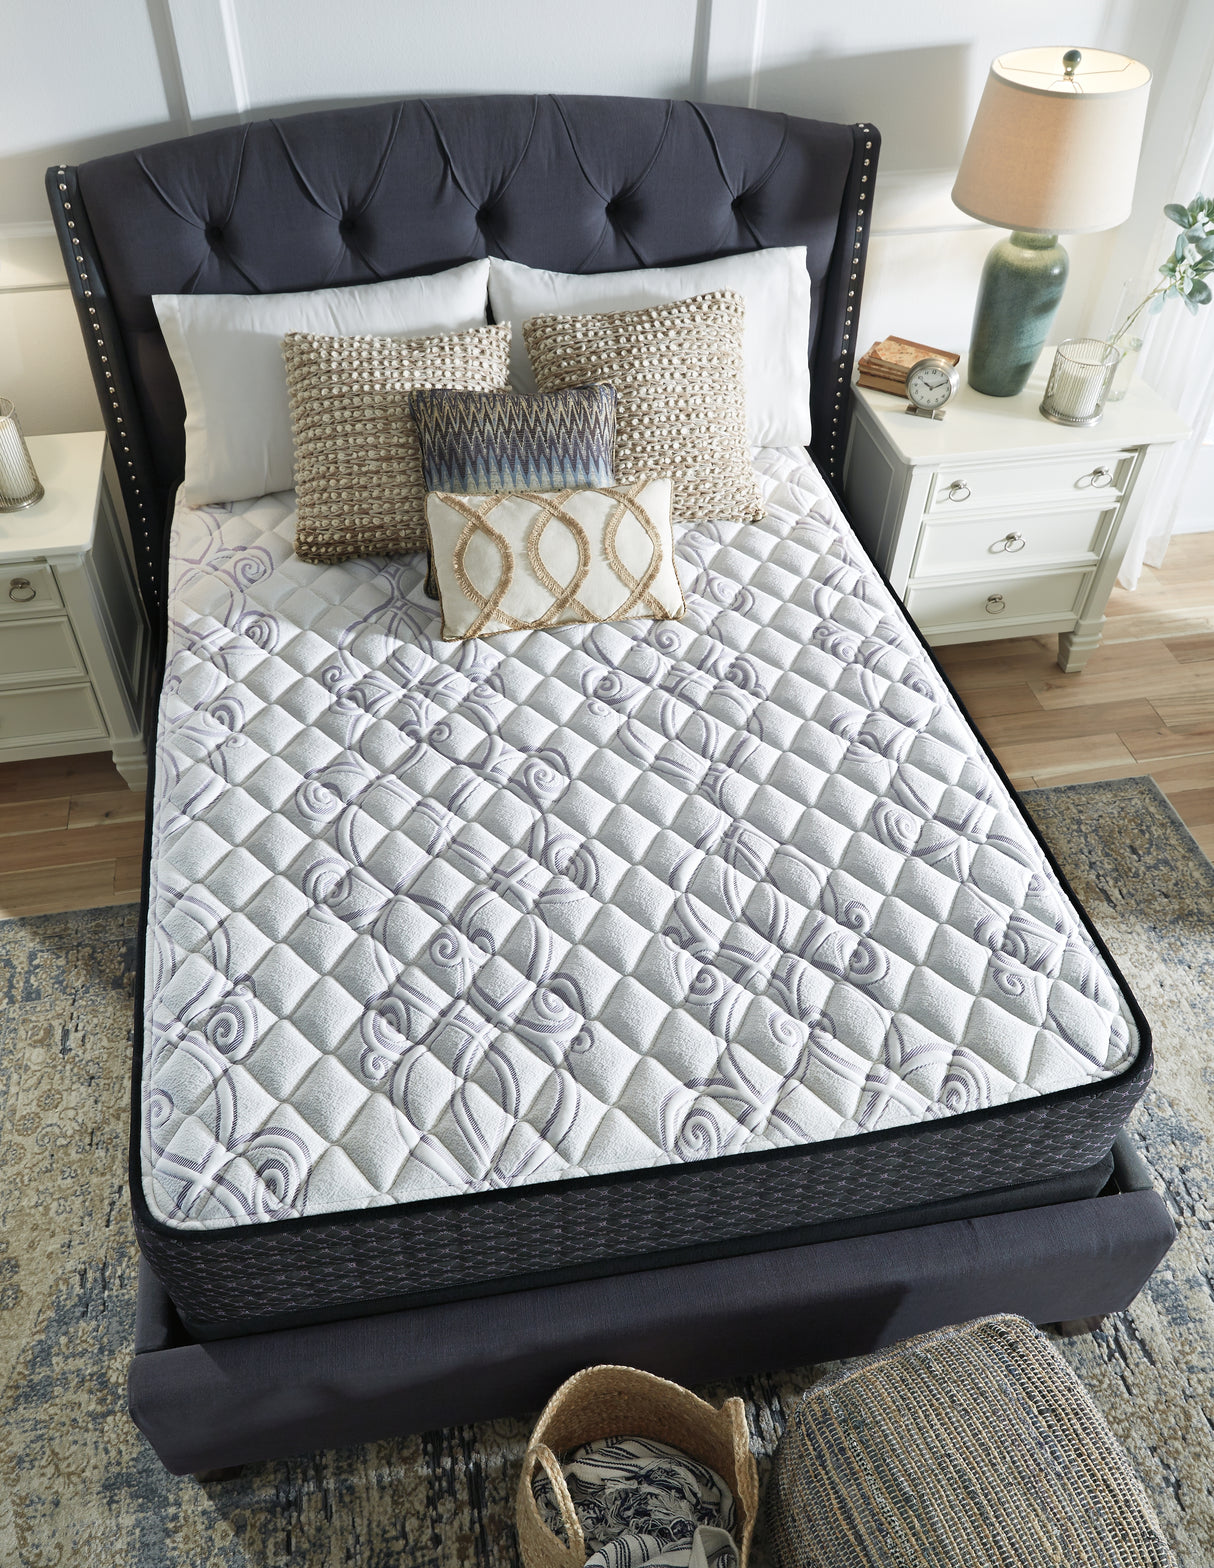 Limited White Edition Firm King Mattress